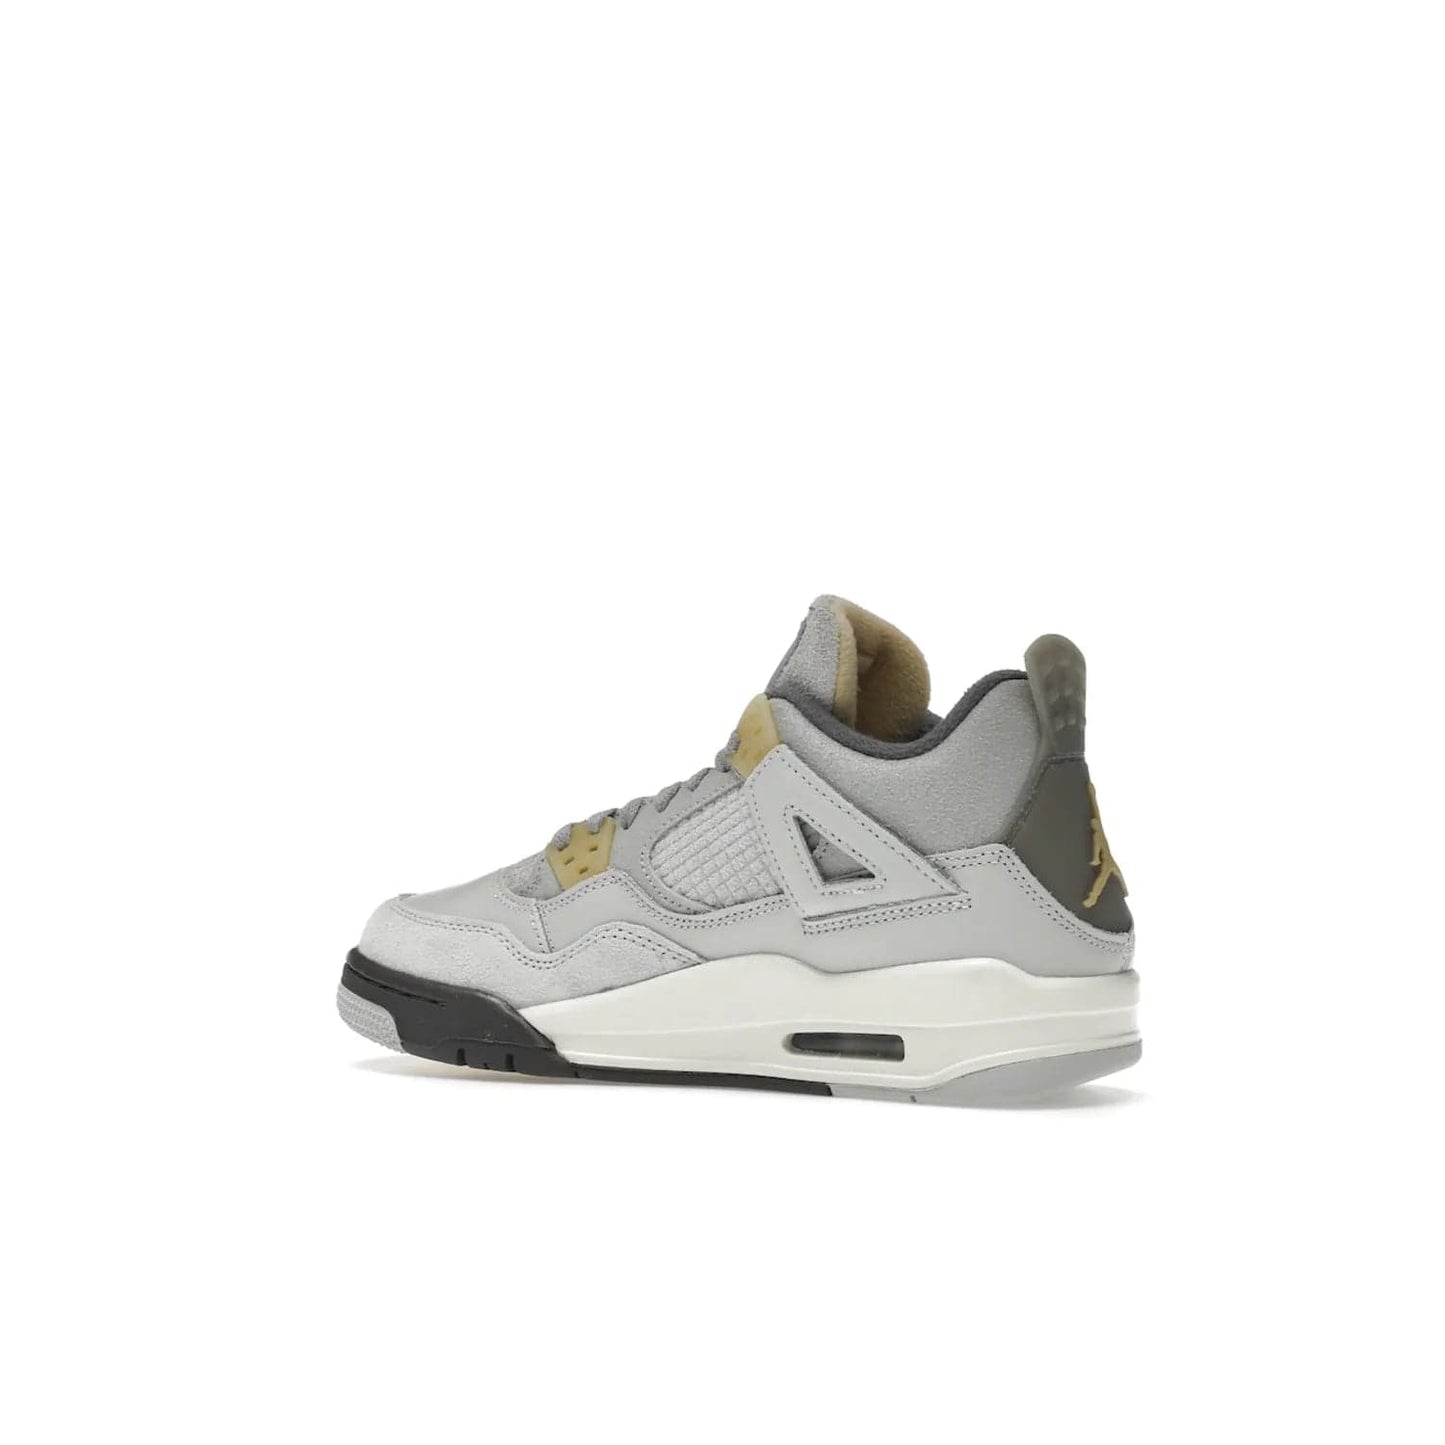 Jordan 4 Retro SE Craft Photon Dust (GS) - Image 22 - Only at www.BallersClubKickz.com - Shop the Jordan 4 Retro SE Craft Photon Dust (GS), the ultimate mix of style and comfort. With photonic dust, pale vanilla, off-white, grey fog, flat pewter and sail colorway, foam midsole, and rubber outsole, don't miss this special edition Jordan 4 releasing Feb 11, 2023.